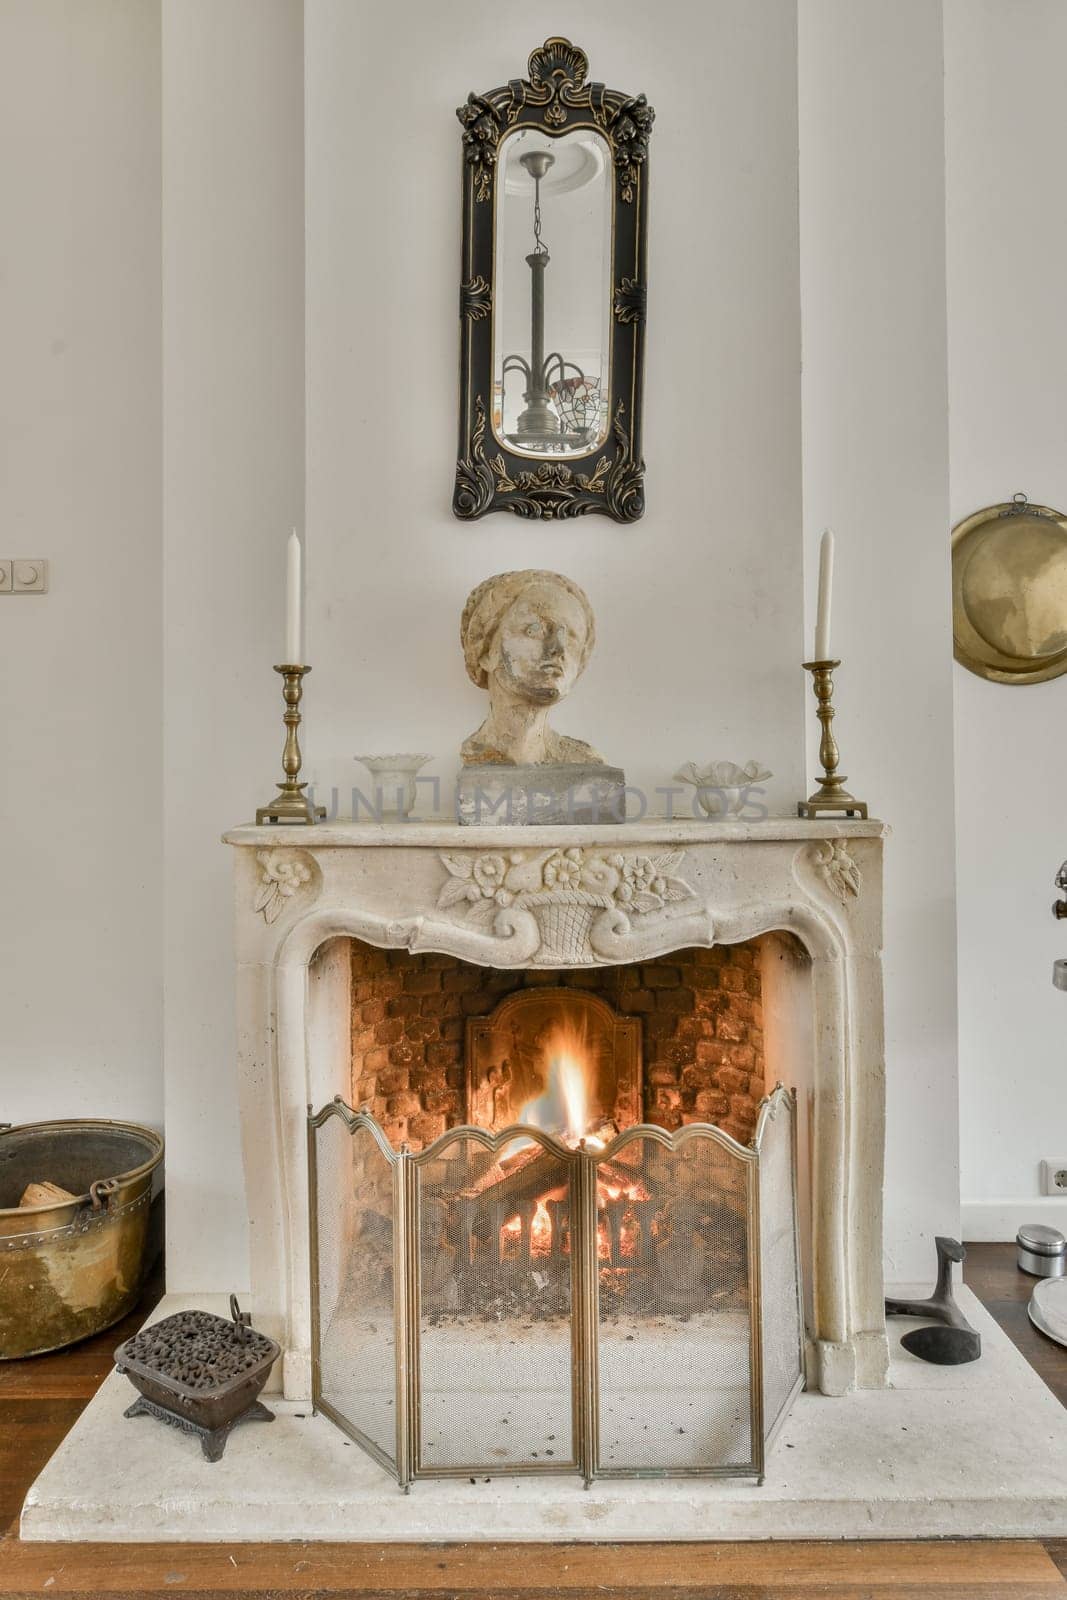 an old fireplace in a room with white walls and wood flooring on the right side, there is a mirror hanging above it